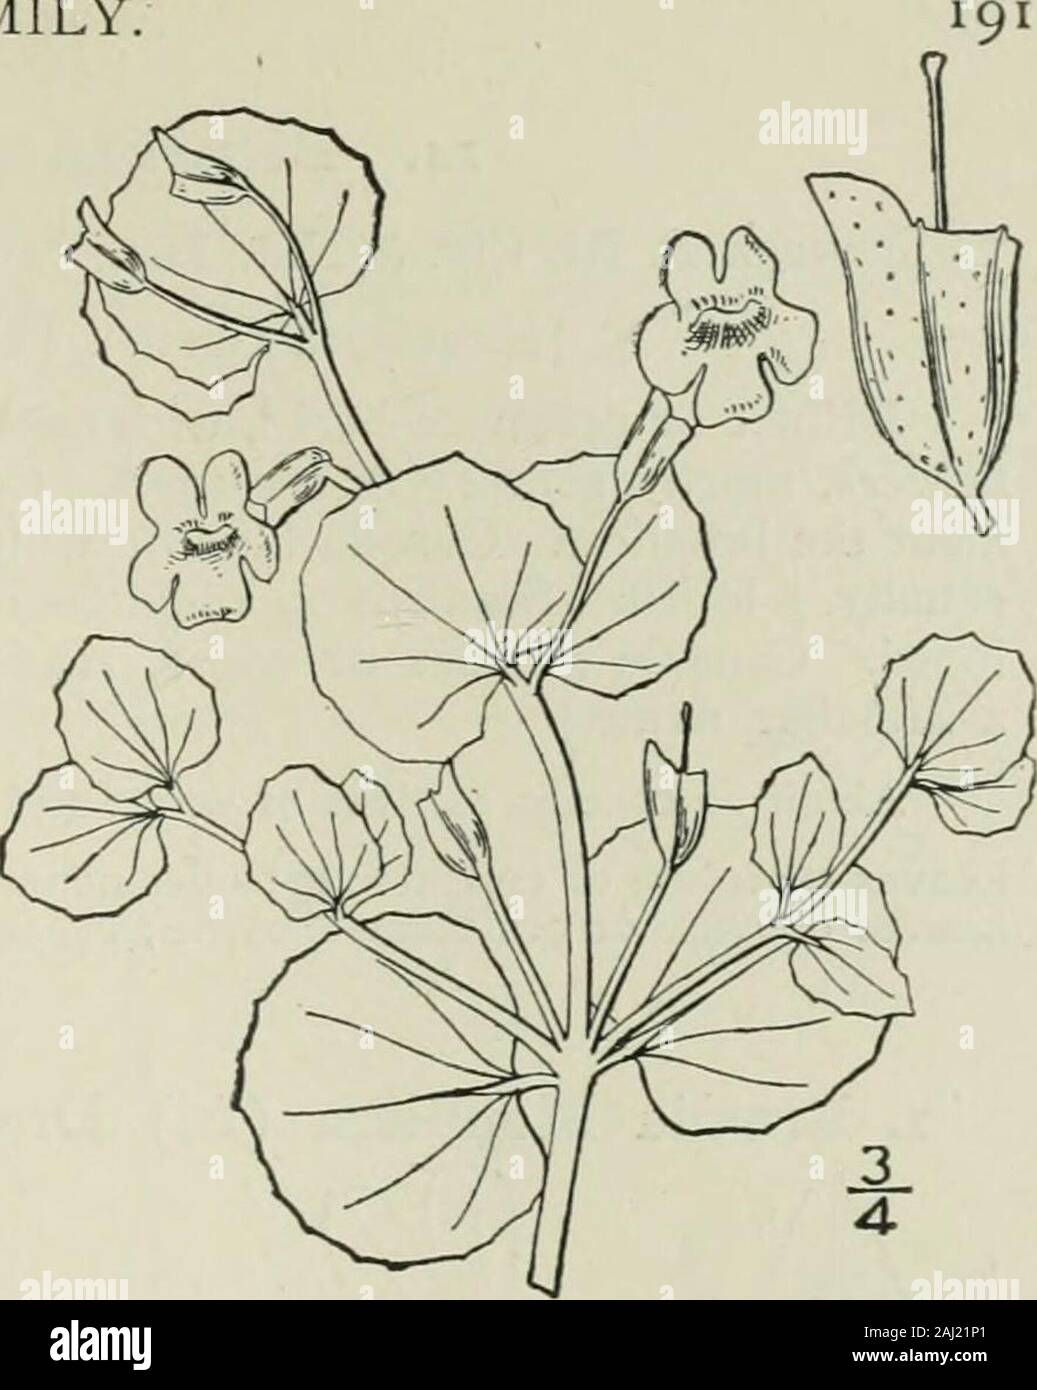 An illustrated flora of the northern United States, Canada and the British possessions : from Newfoundland to the parallel of the southern boundary of Virginia and from the Atlantic Ocean westward to the 102nd meridian . 4. Mimulus Geyeri Torr. Geyers Yellow Alonkey-tiower. Fig. 3778.M. Geyeri Torr. in Nicollet, Rep. Up. Miss. 157. 1843.Miniuhis Jamesii T. & G.; Benth. in DC. Prodr. 10: 371. 1846.M. glabratus var. Jamesii A. Gray, Syn. Fl. N. A. Ed. 2, 2: 447. 1886. Perennial by stolons, glabrous or nearly so;stems slender, creeping, diffusely branched, root-ing at the nodes, 6-i8 long. Leaves Stock Photo